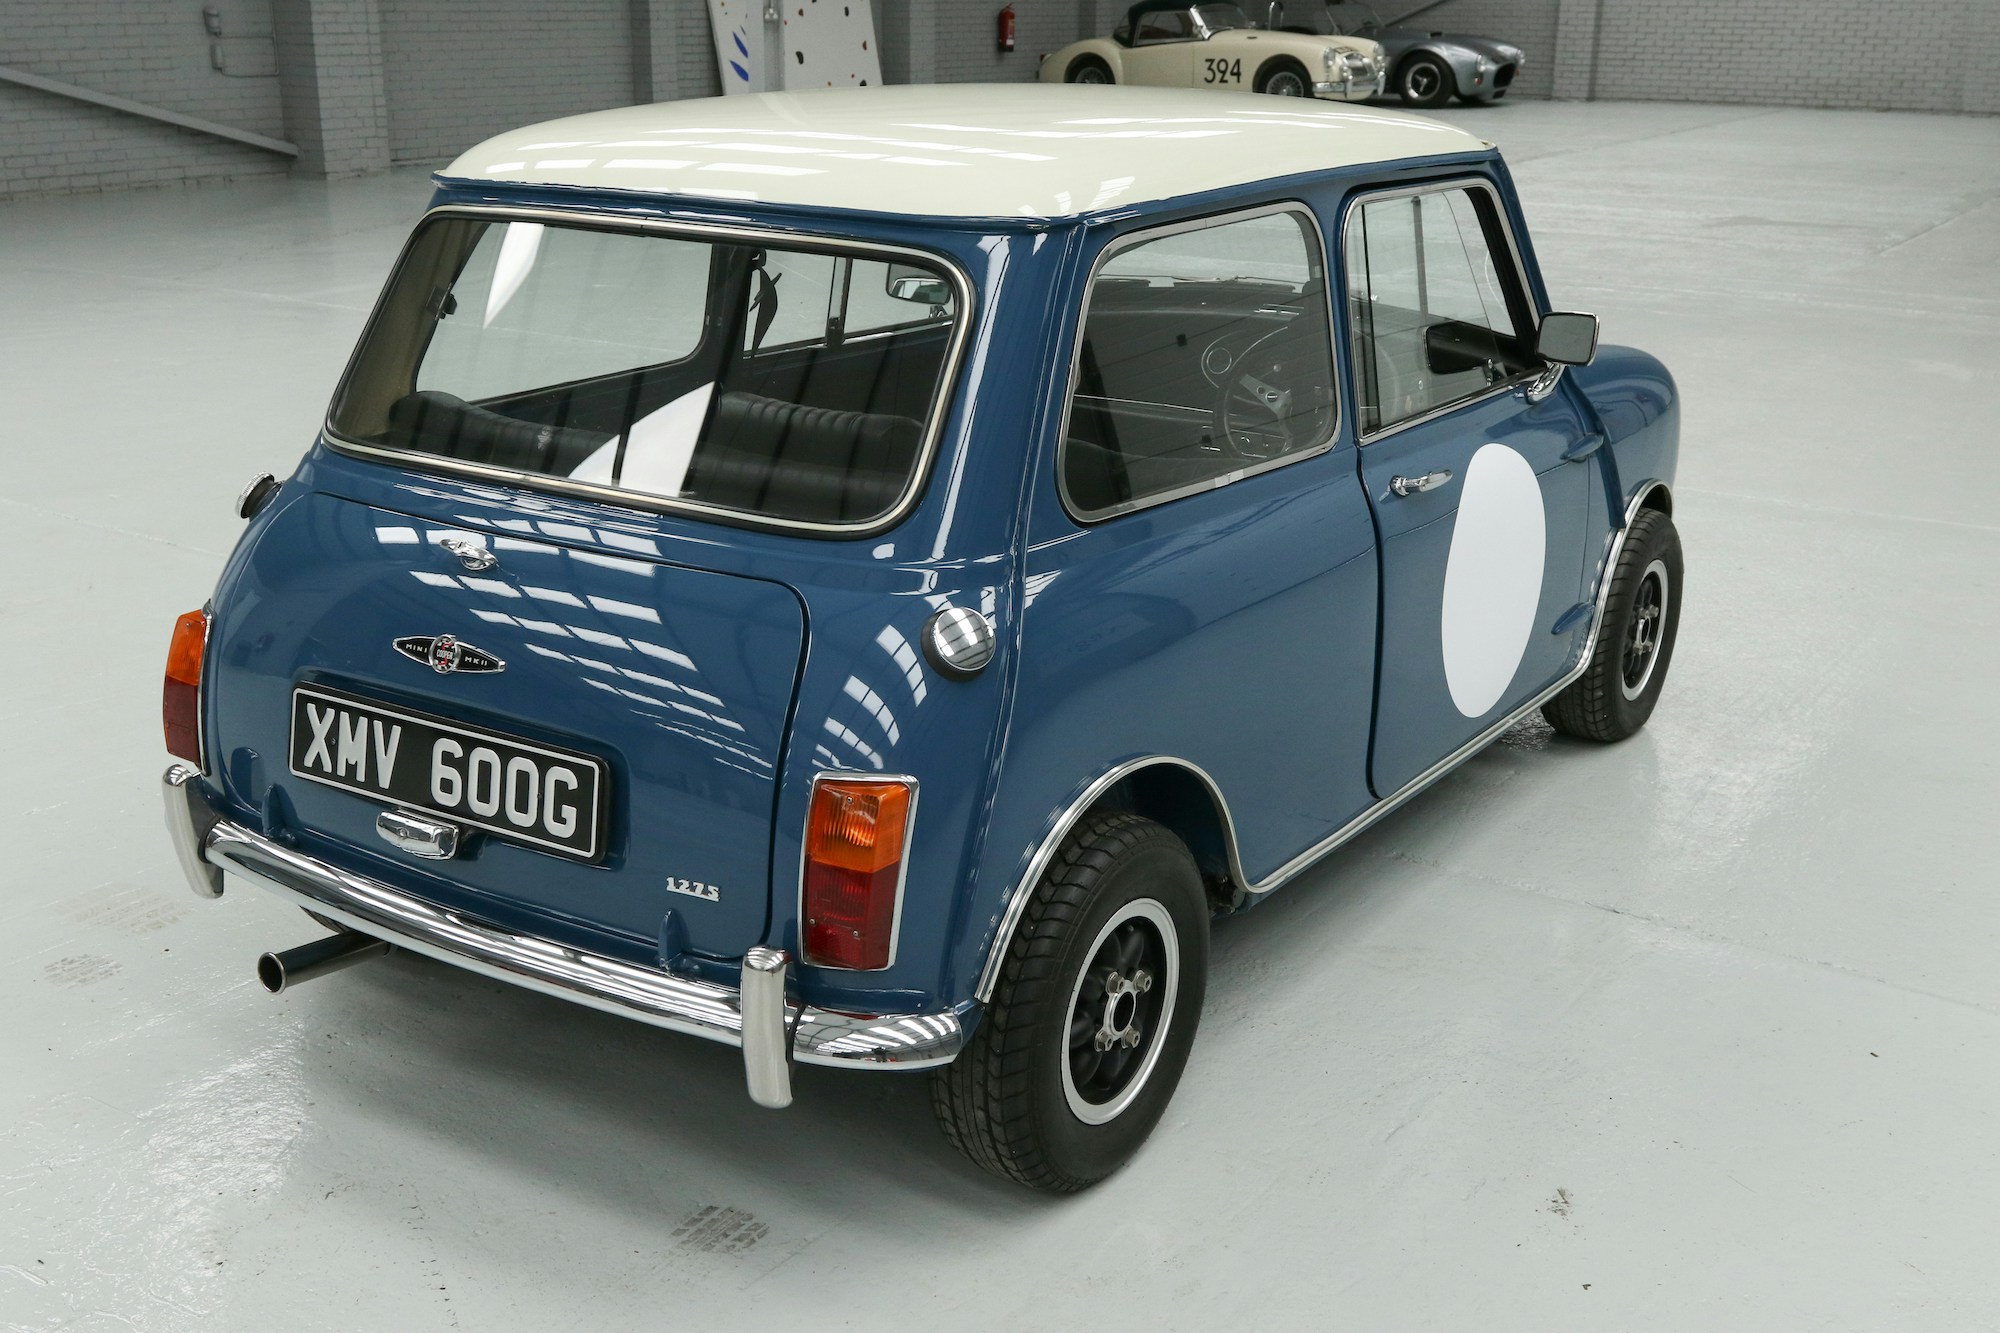 1969 AUSTIN MINI COOPER S MKII for sale by auction in Braintree, Essex ...